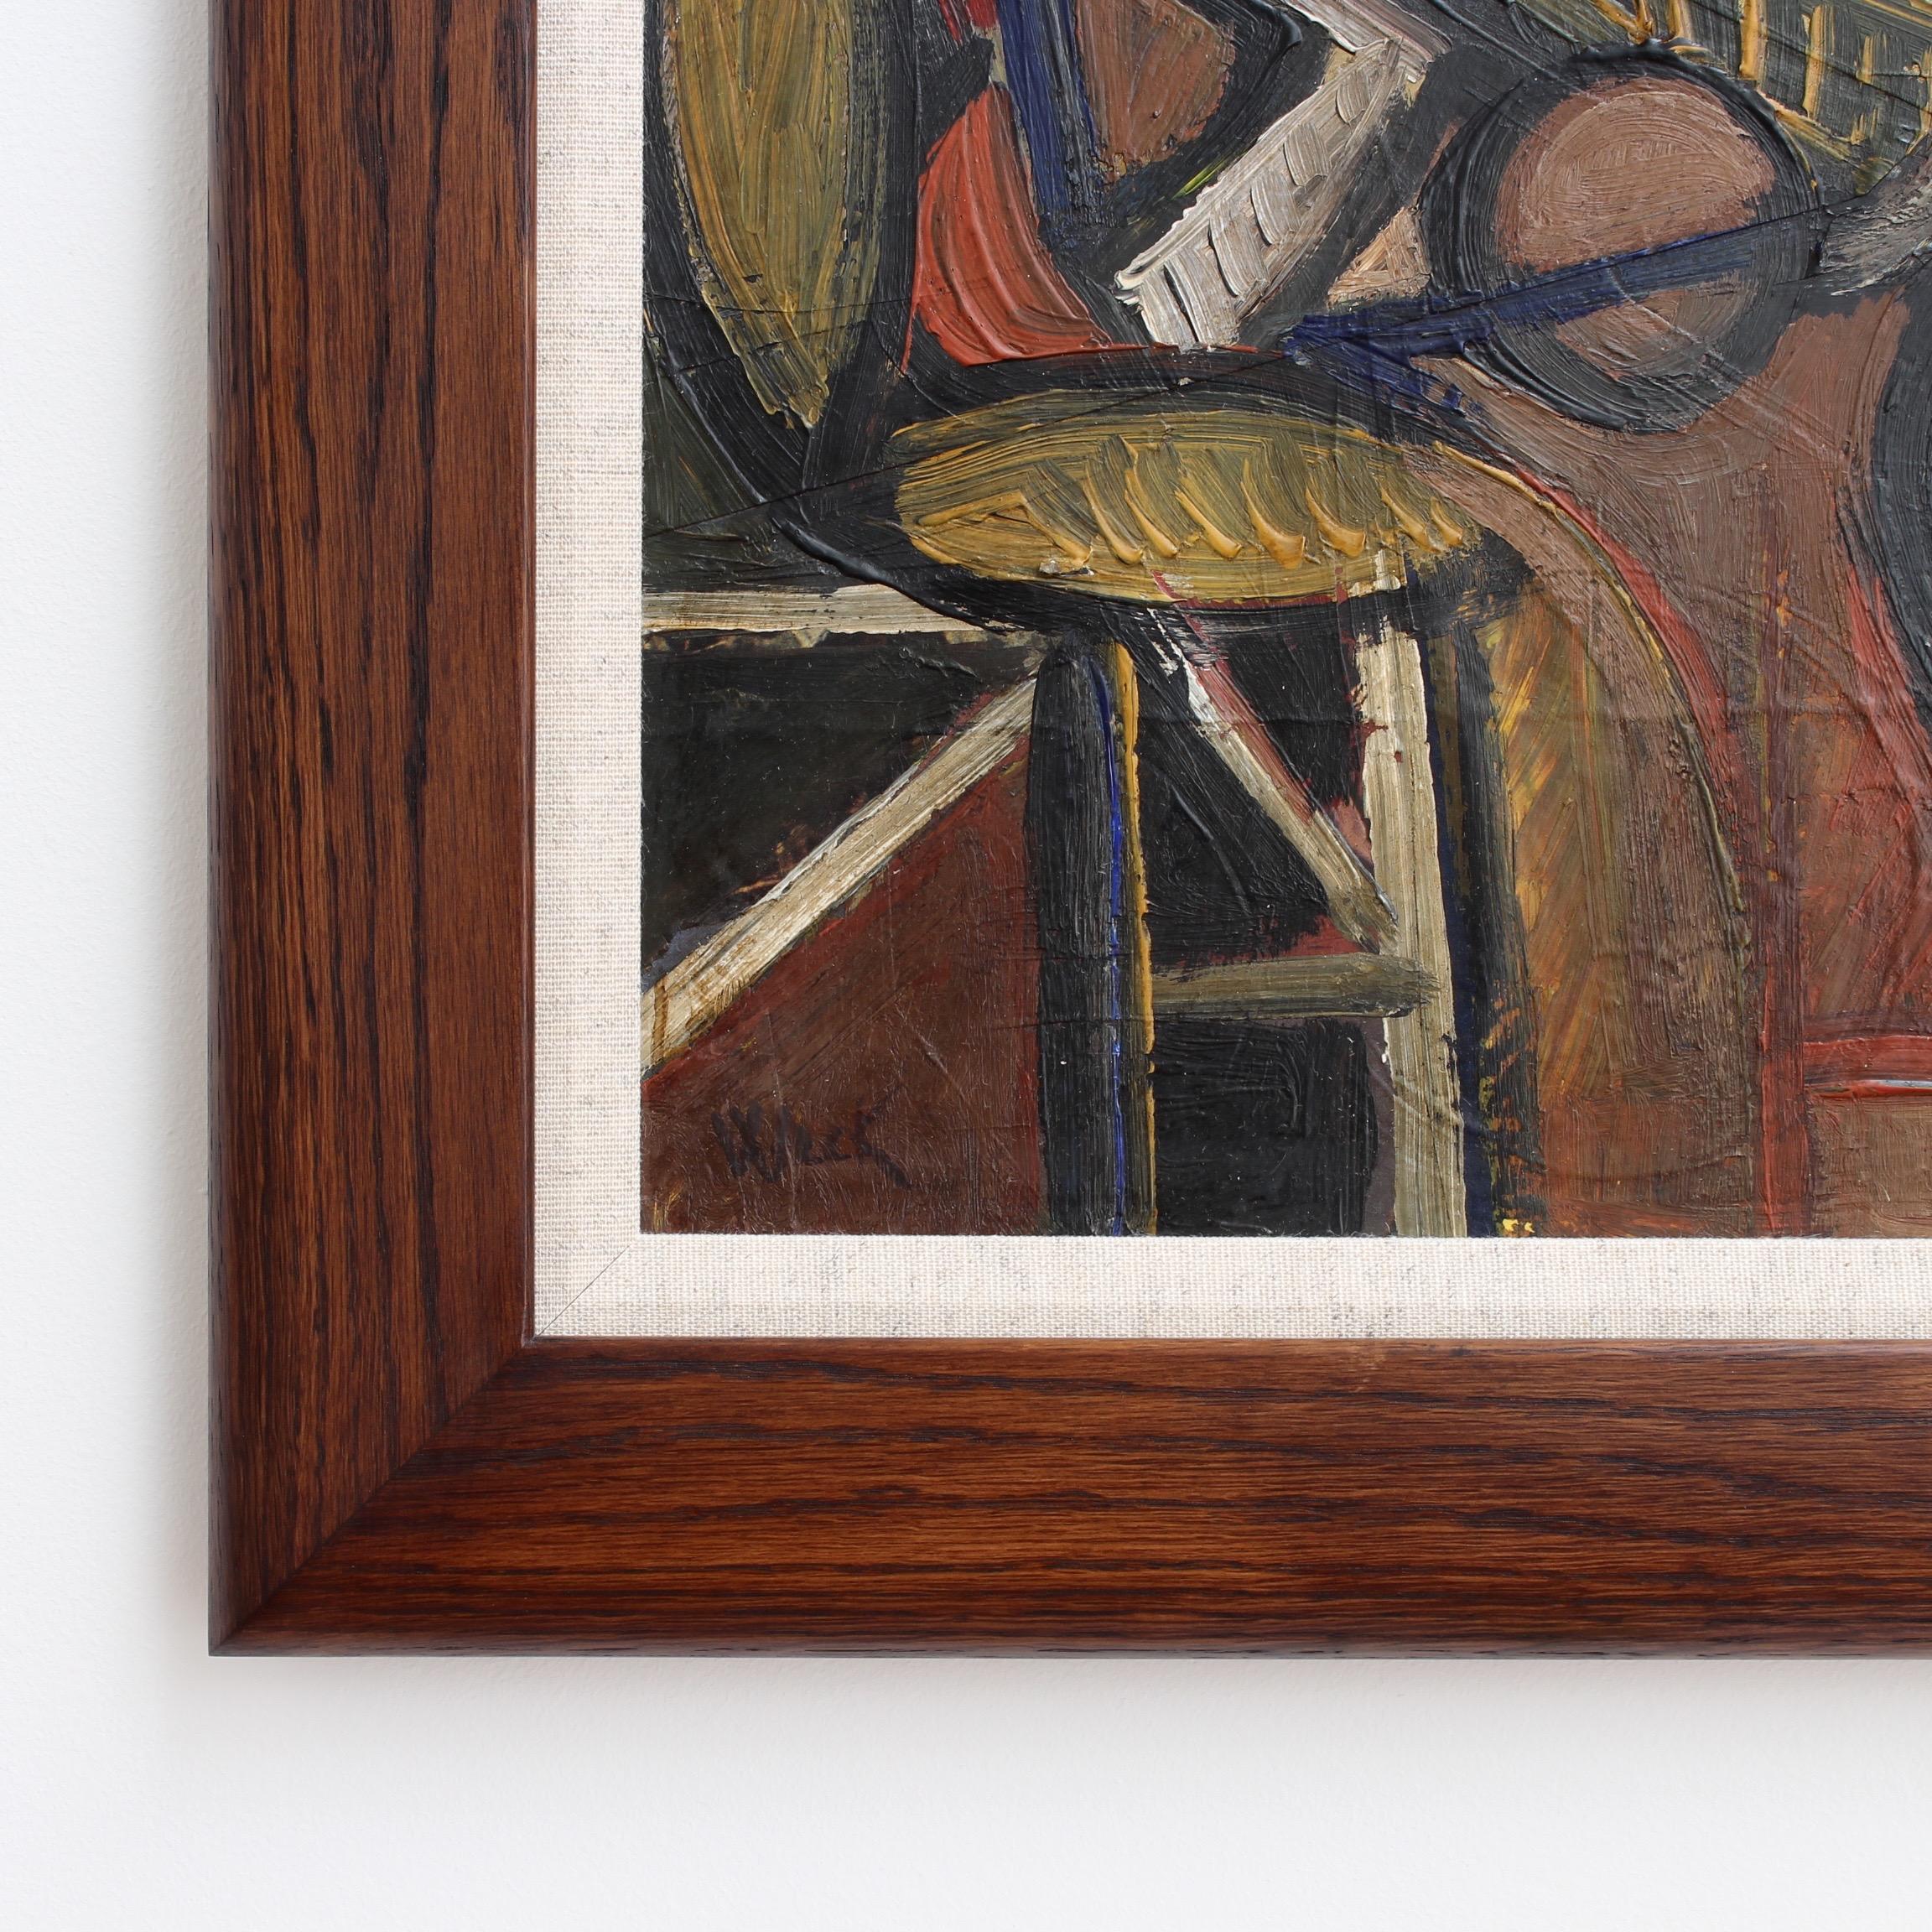 Weck, 'Mother and Child', Midcentury Modern Cubist Oil Portrait Painting, Berlin 3